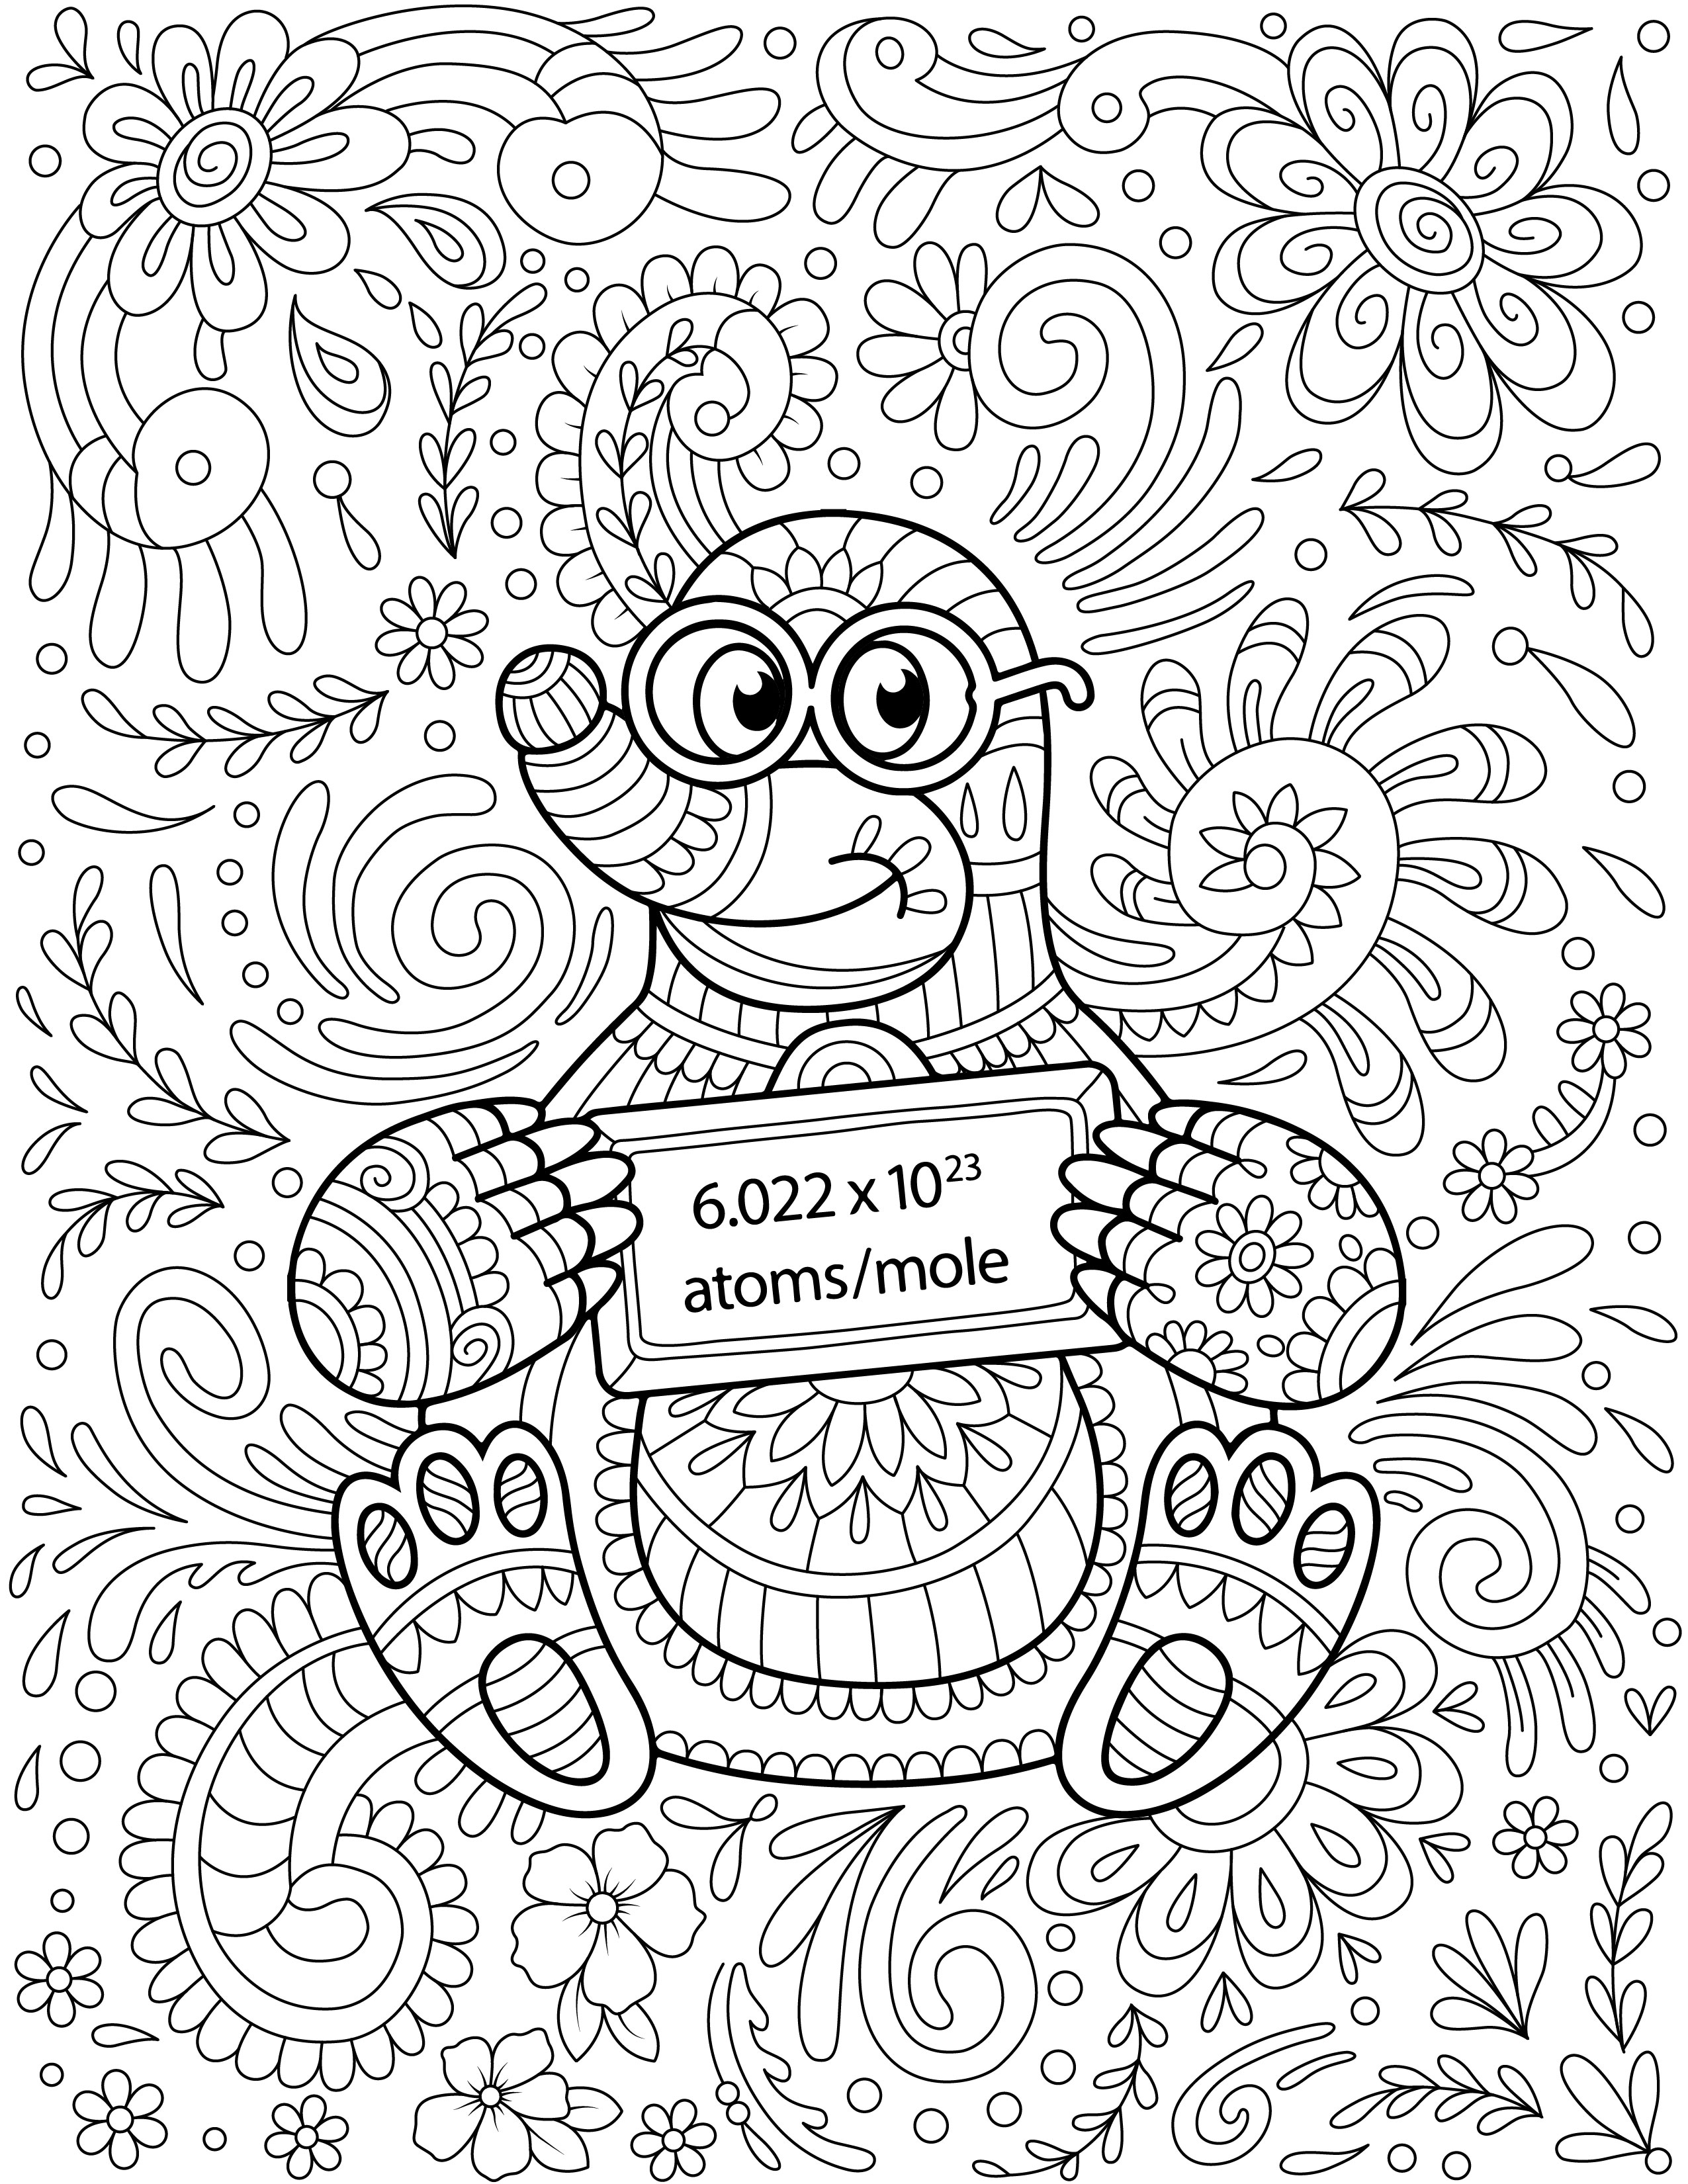 M is for mole coloring book page